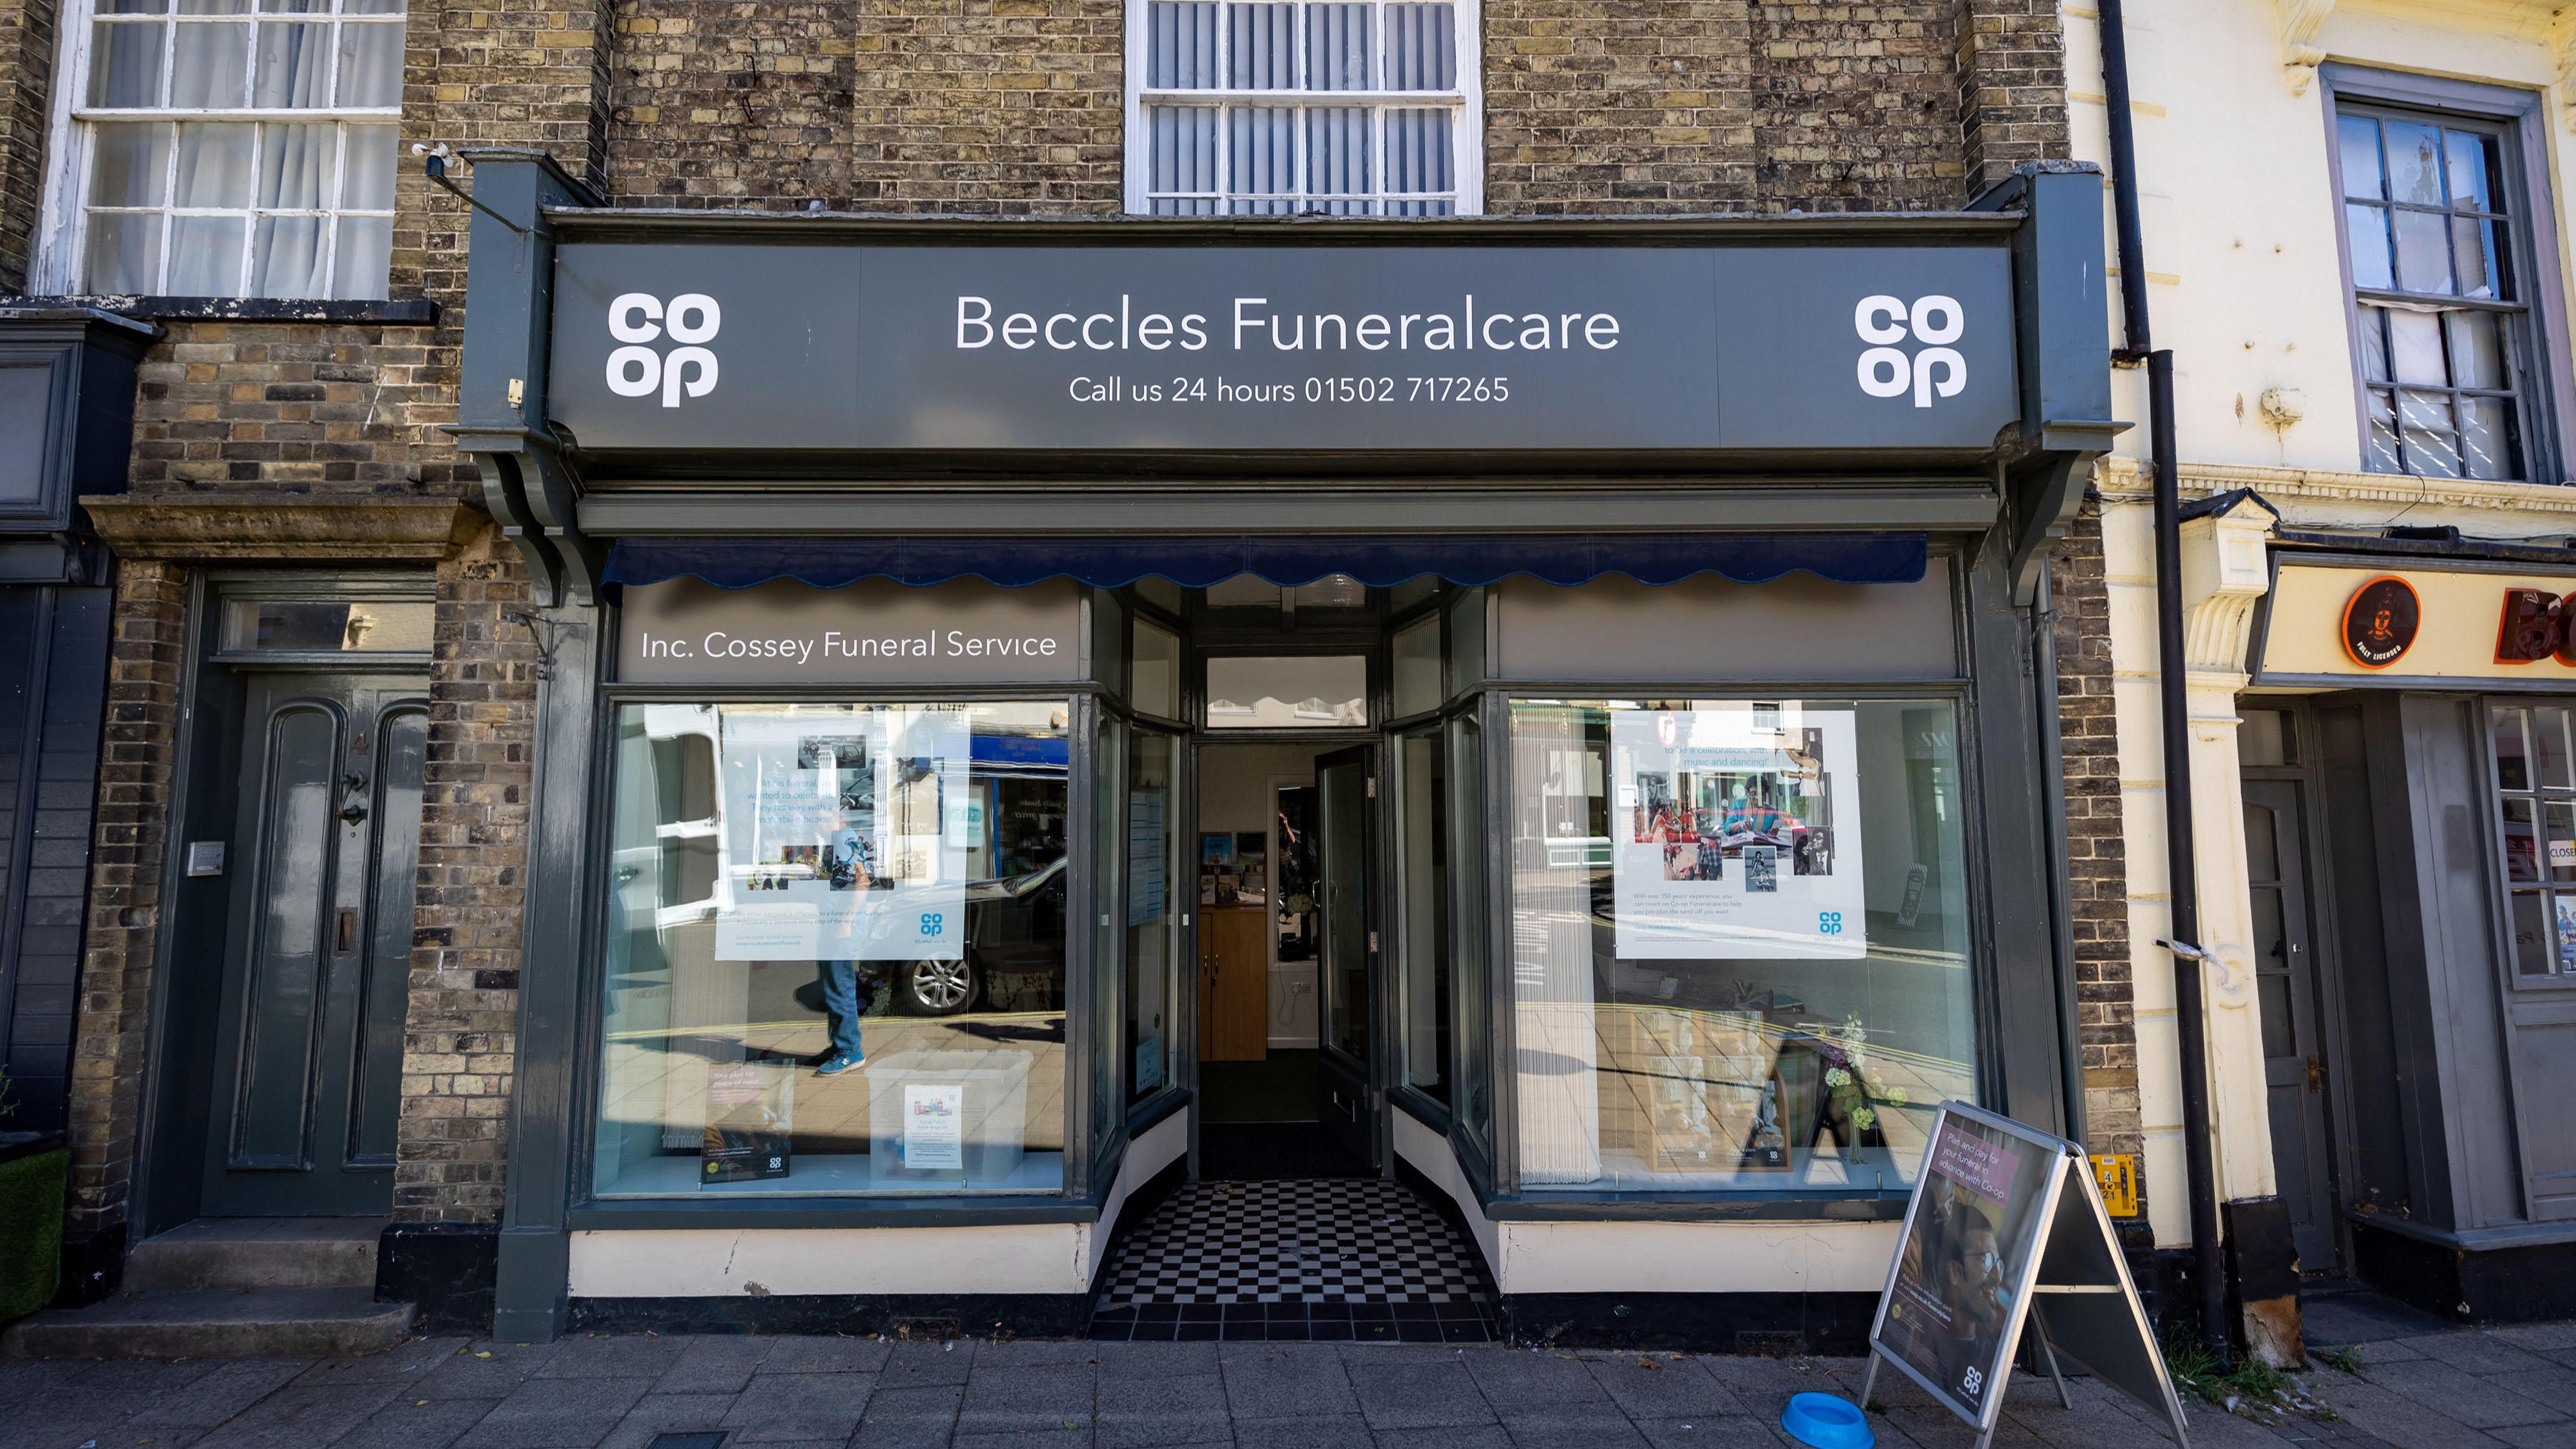 Images Beccles Funeralcare (Inc. Cossey)